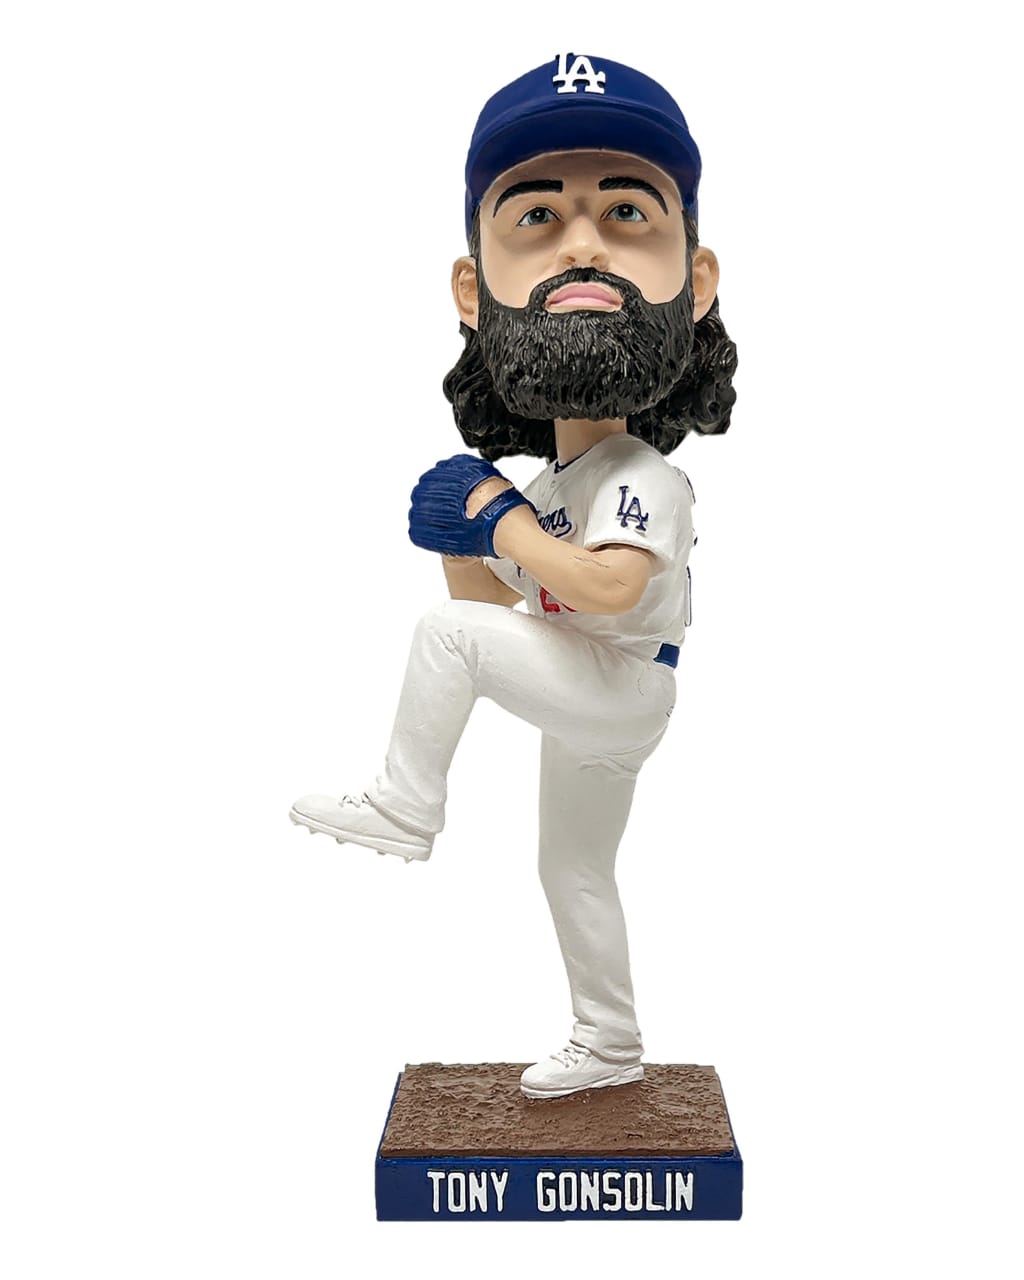 JD Martinez Los Angeles Dodgers 300 Home Run Bobblehead Officially Licensed by MLB